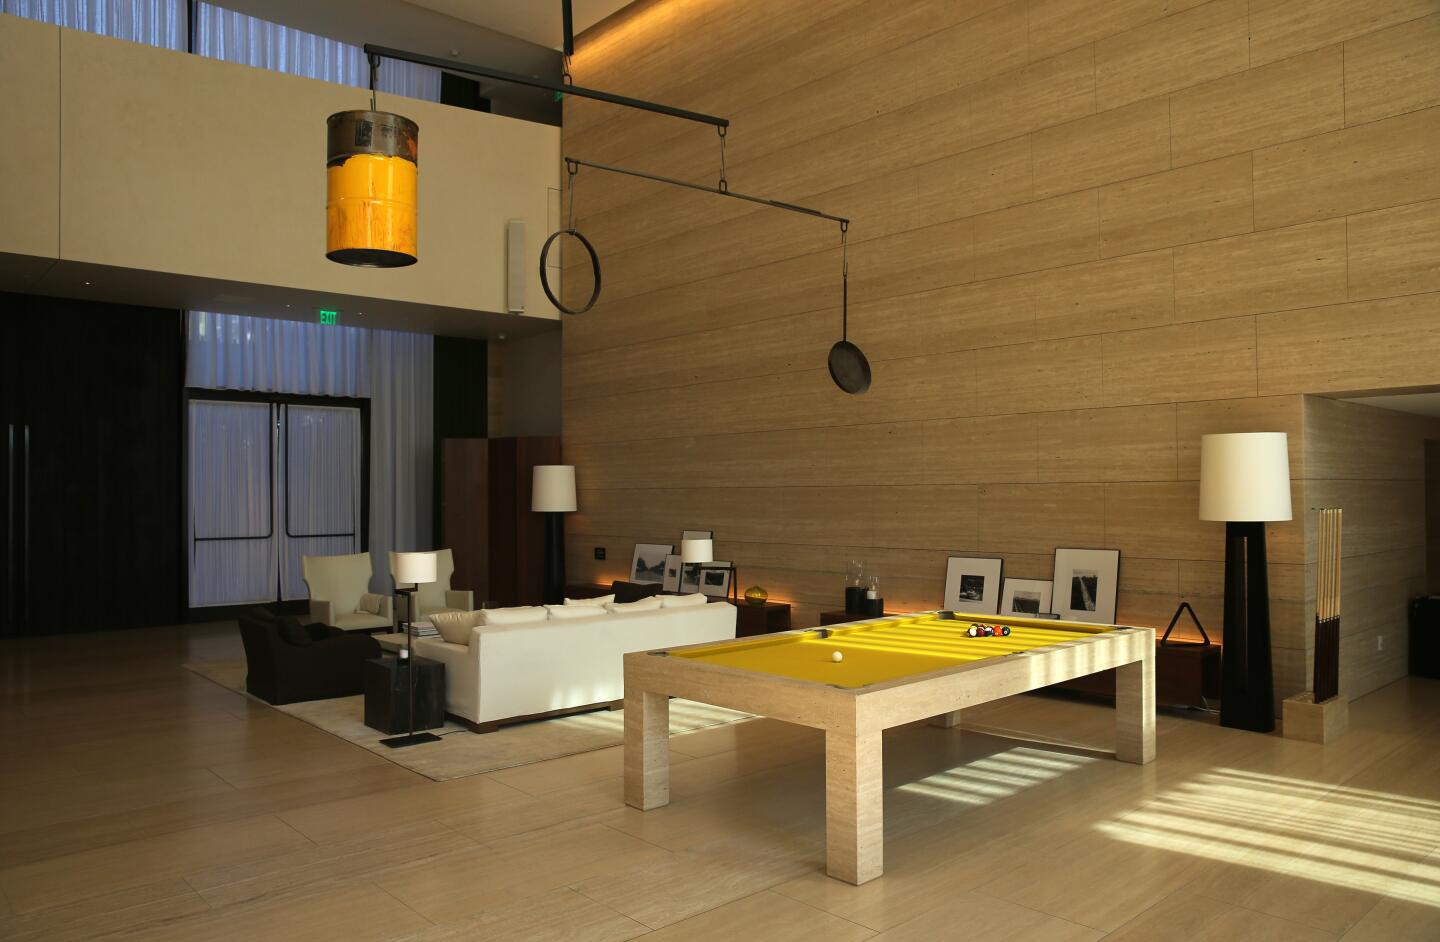 A yellow-felt pool table in the lobby of the new Edition hotel in West Hollywood, Calif.